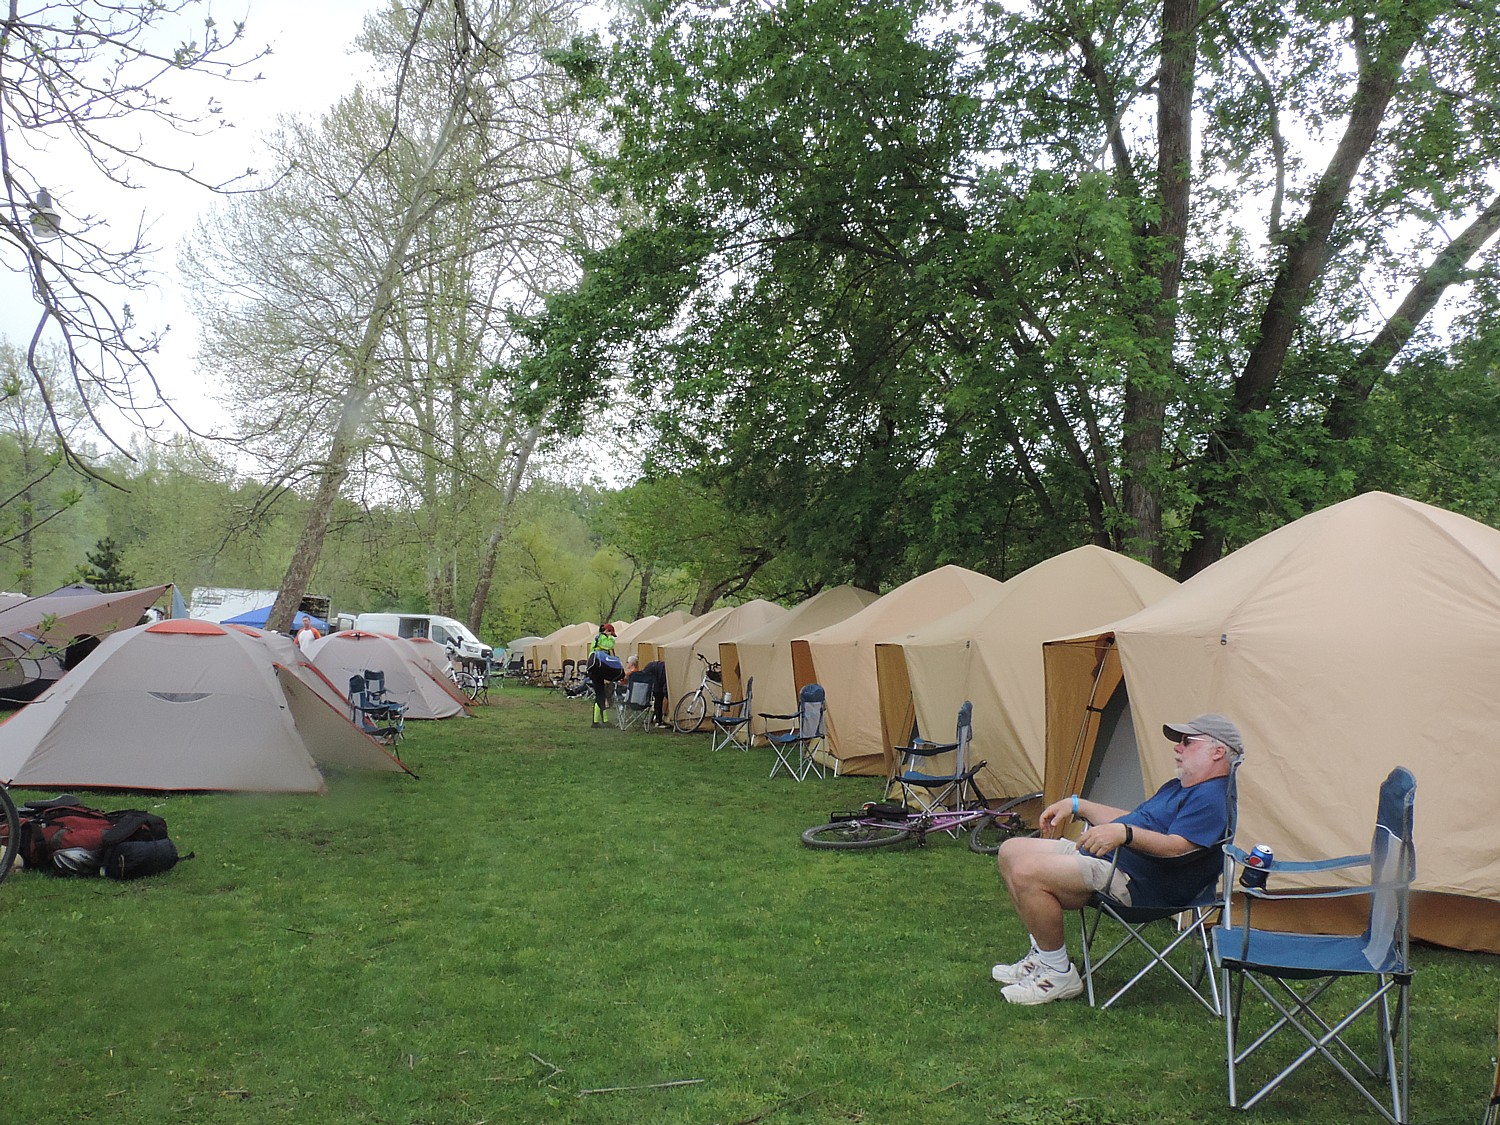 The end of our 33-mile ride on Day 2 of Rails-to-Trails Conservancy's Spring Sojourn on the Great Allegheny Passage takes us to the ROA camping resort in Adelaide, where Comfy Campers has already set up tents © 2016 Karen Rubin/goingplacesfarandnear.com